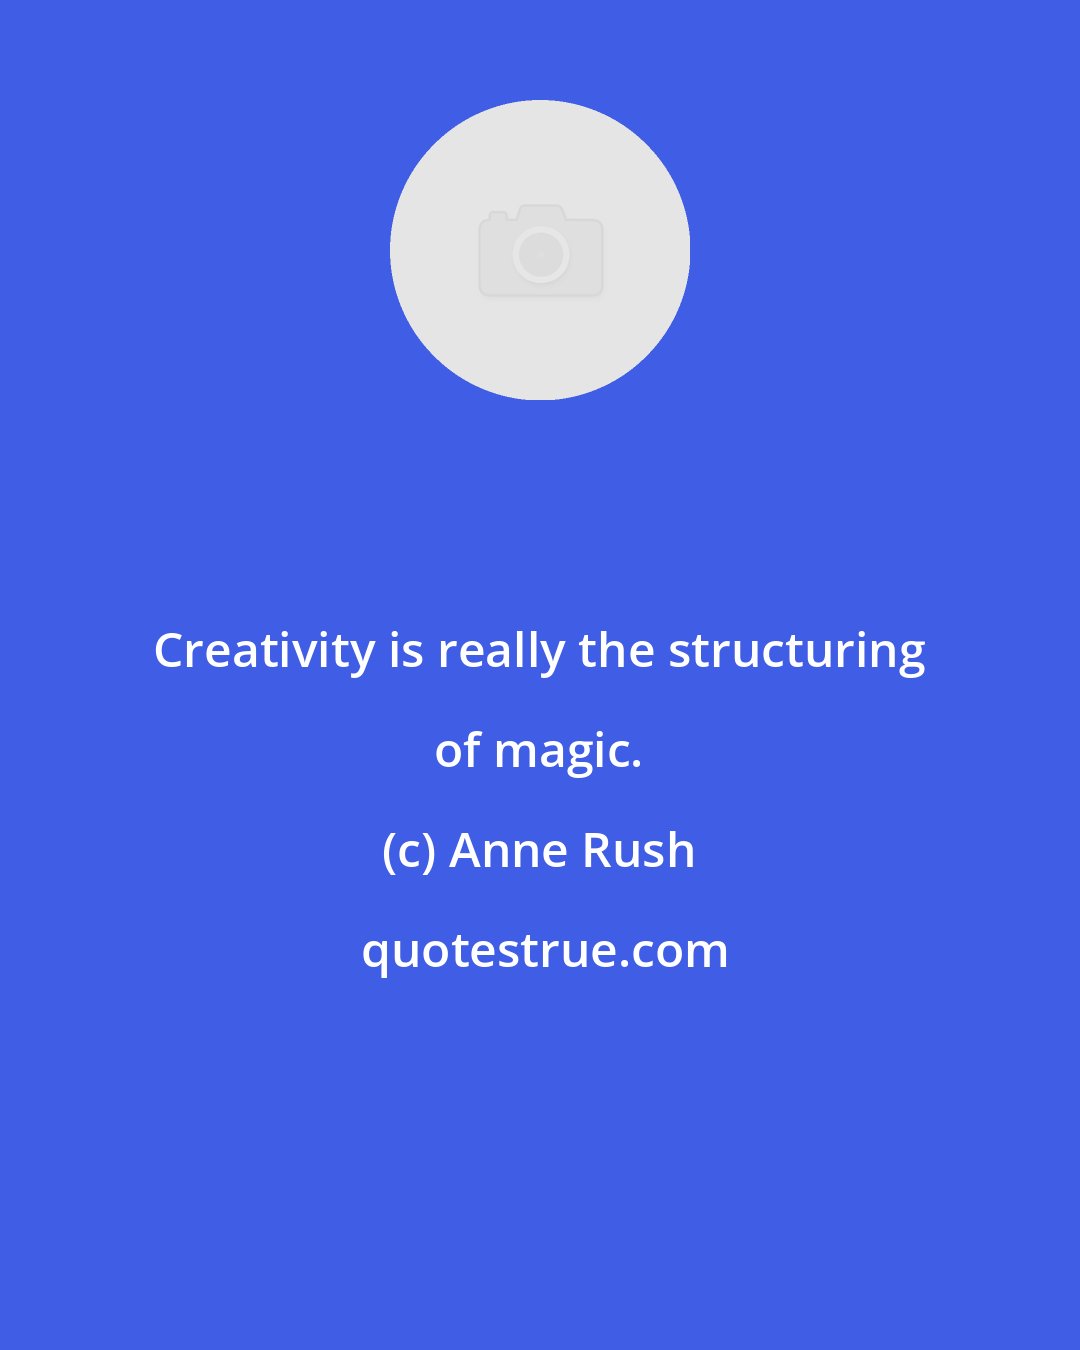 Anne Rush: Creativity is really the structuring of magic.